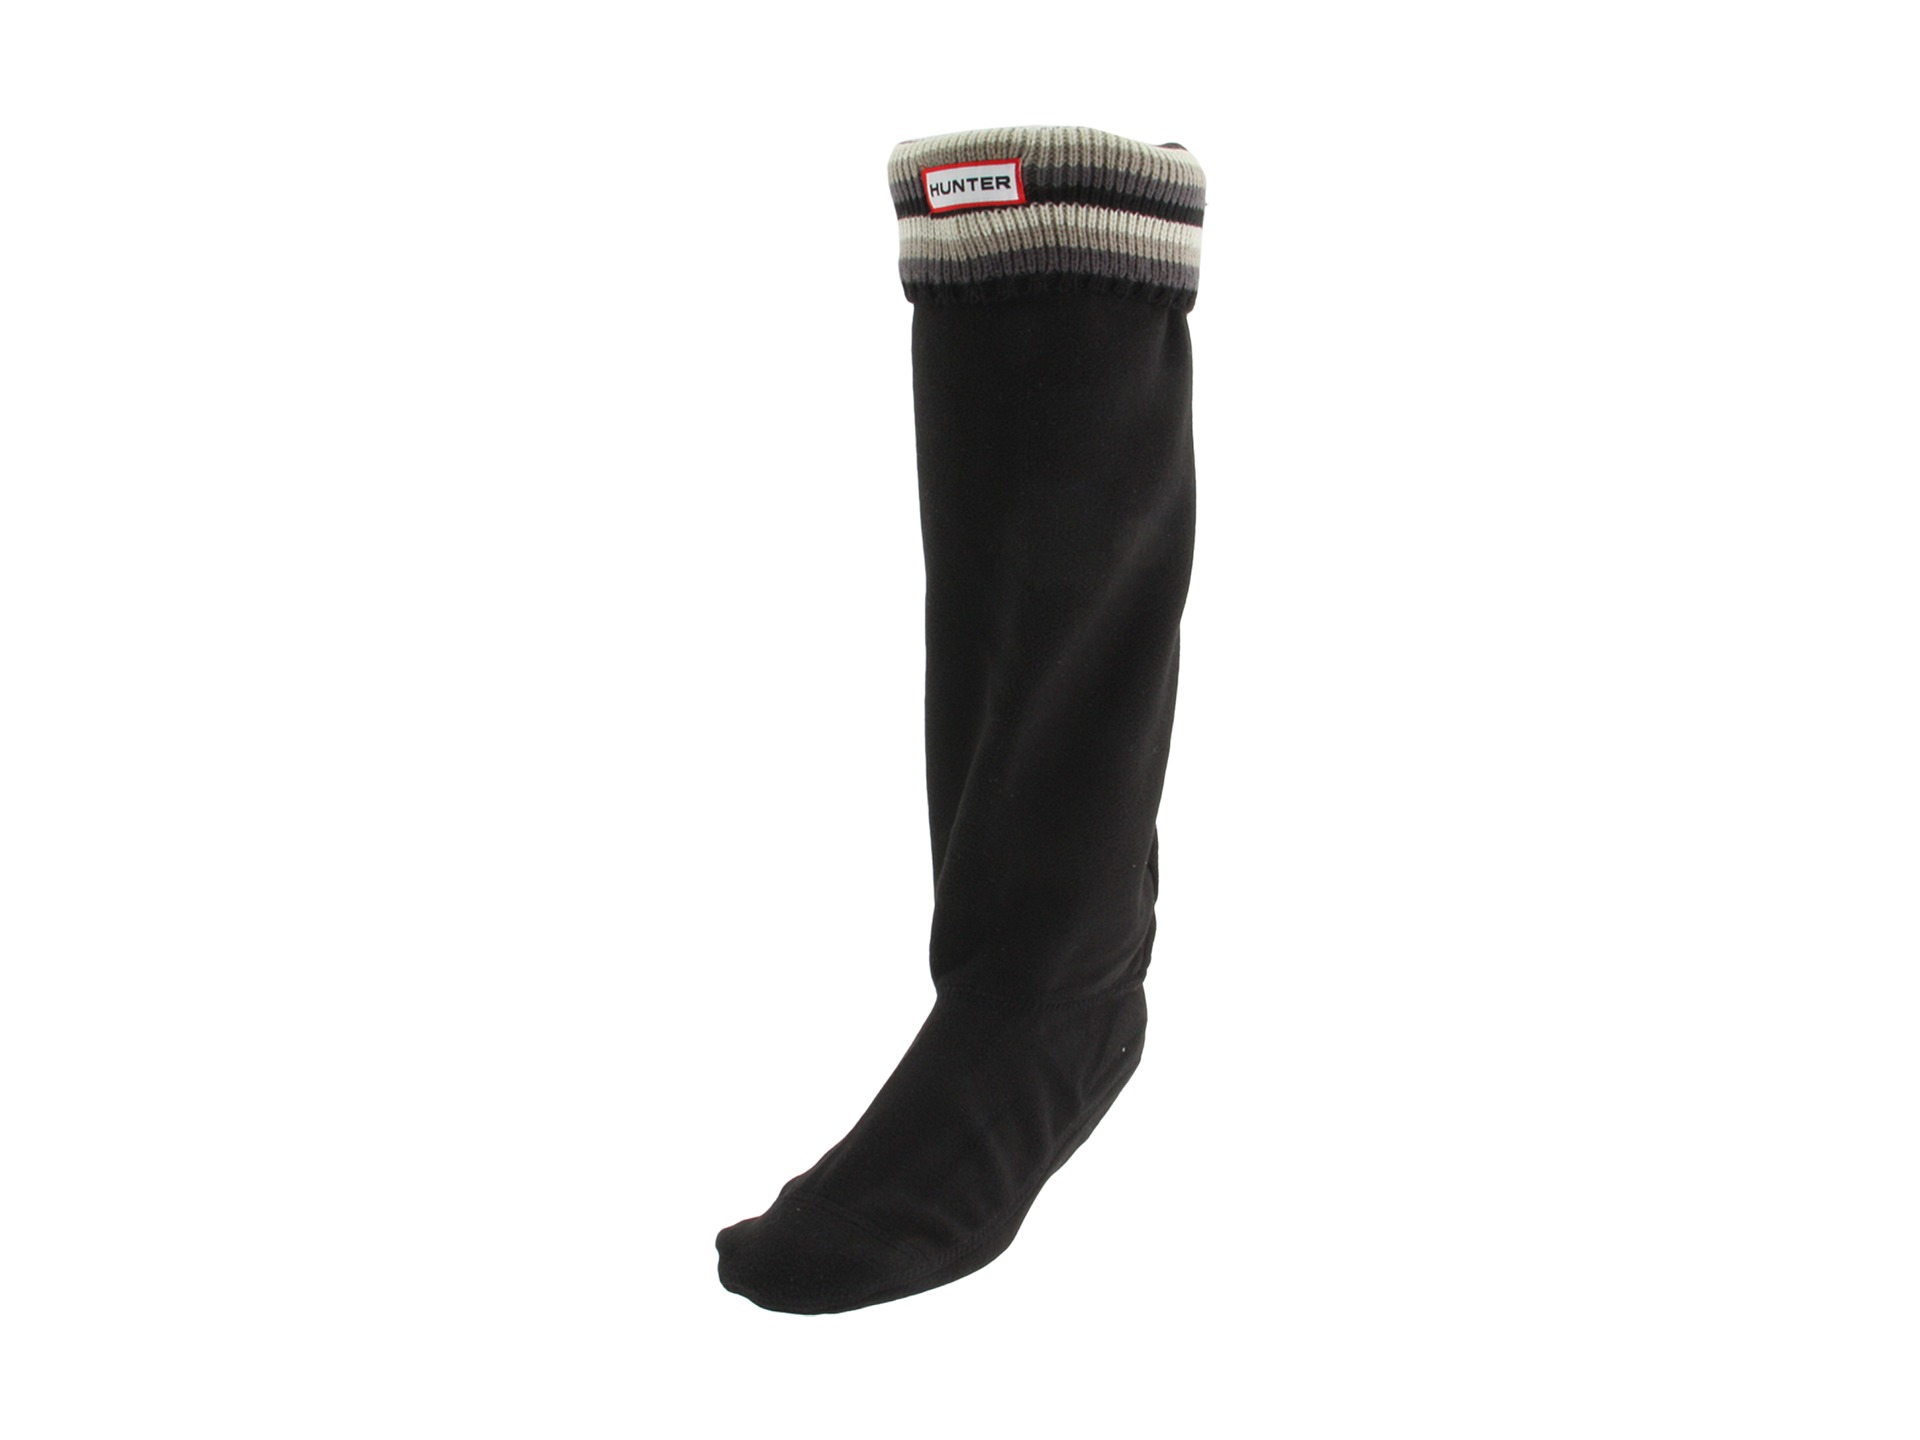 Hunter Welly Sock with Knitted Striped Cuff    